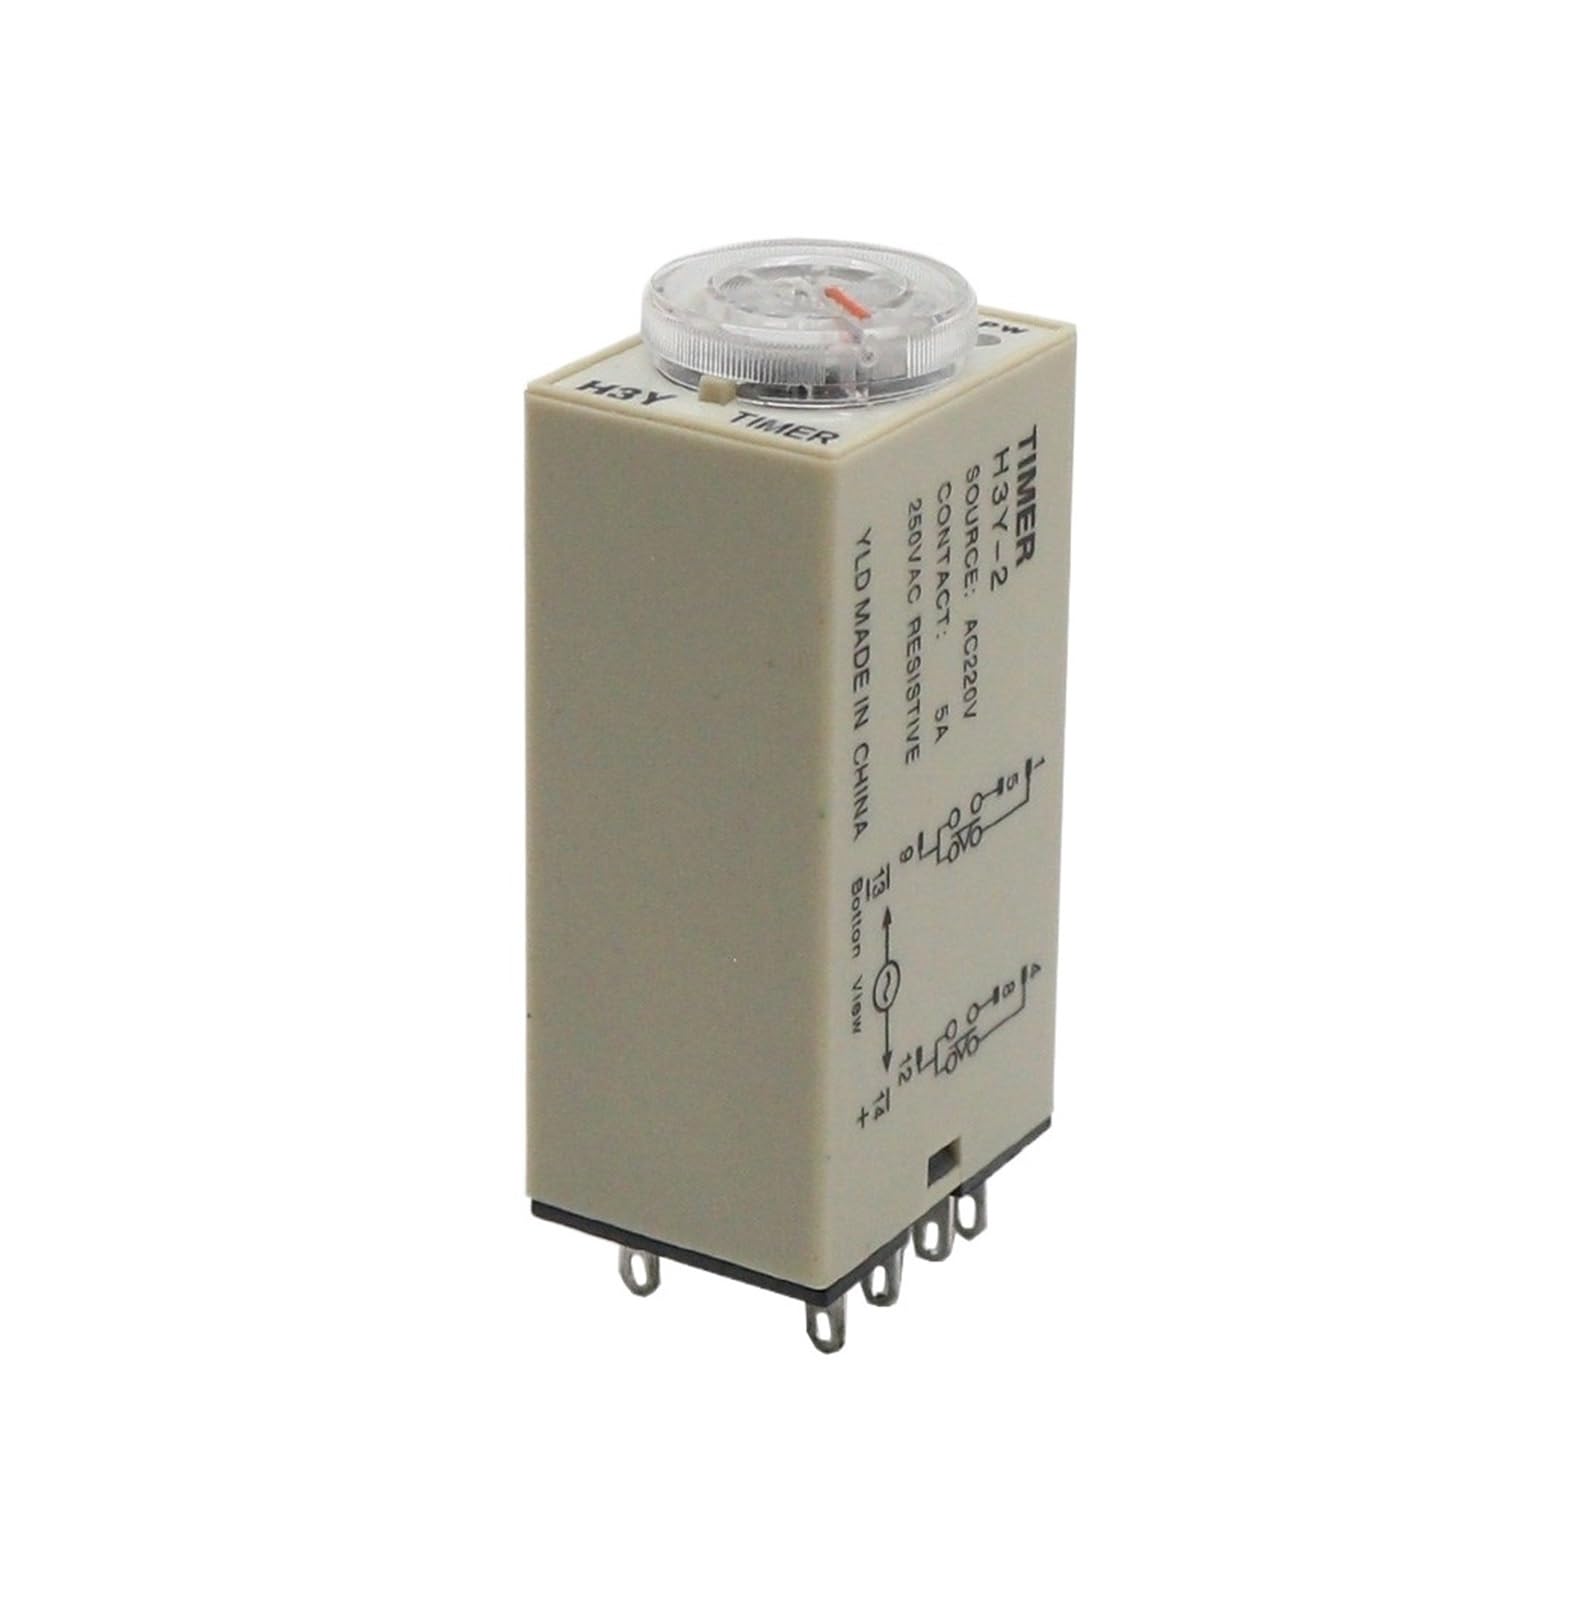 1pcs Power on Delay Time Relay H3Y-2 Small 8-pinDC12V24vAC220v Timer Switch 1S 3S 5S 30S 60S 5M 10M 30M 60M LABDIP(DC 24V,H3Y-2 10Minute) von LABDIP